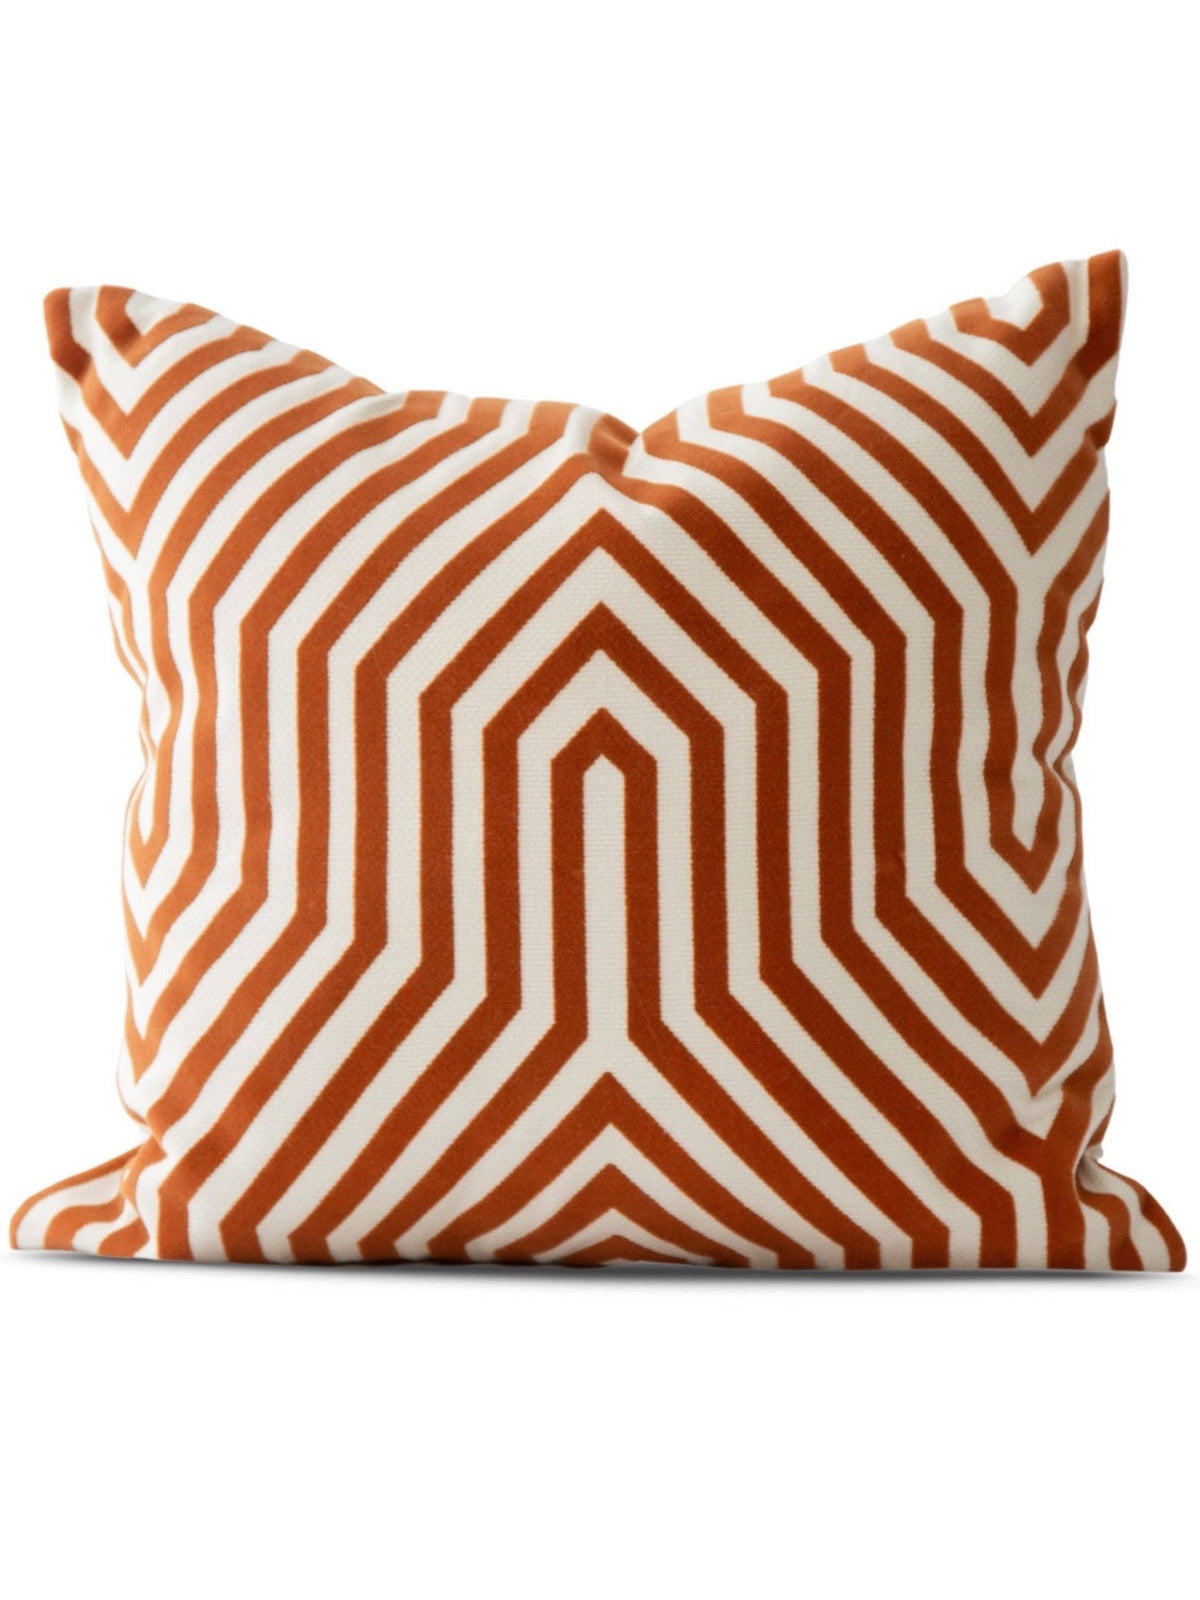 The Nuova Modern Geometric throw pillow is sure to make a statement in your home with a linen-textured 100% cotton cream woven fabric layered with a yarn-dyed contrast pattern. Available in 2 colors sold by KYA Home Decor 